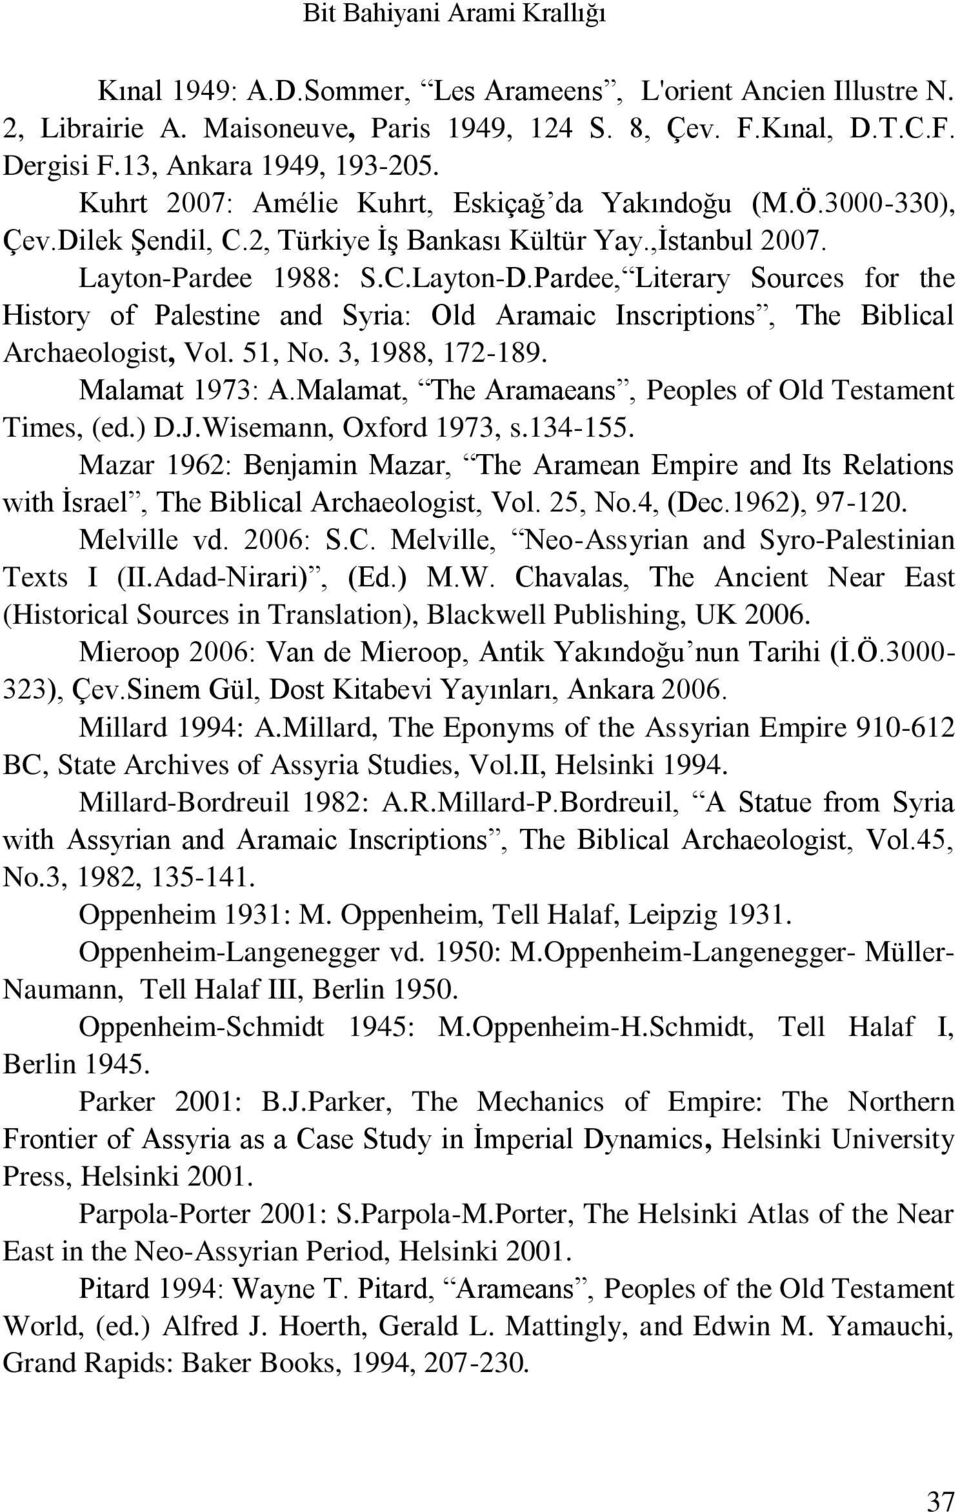 Pardee, Literary Sources for the History of Palestine and Syria: Old Aramaic Inscriptions, The Biblical Archaeologist, Vol. 51, No. 3, 1988, 172-189. Malamat 1973: A.